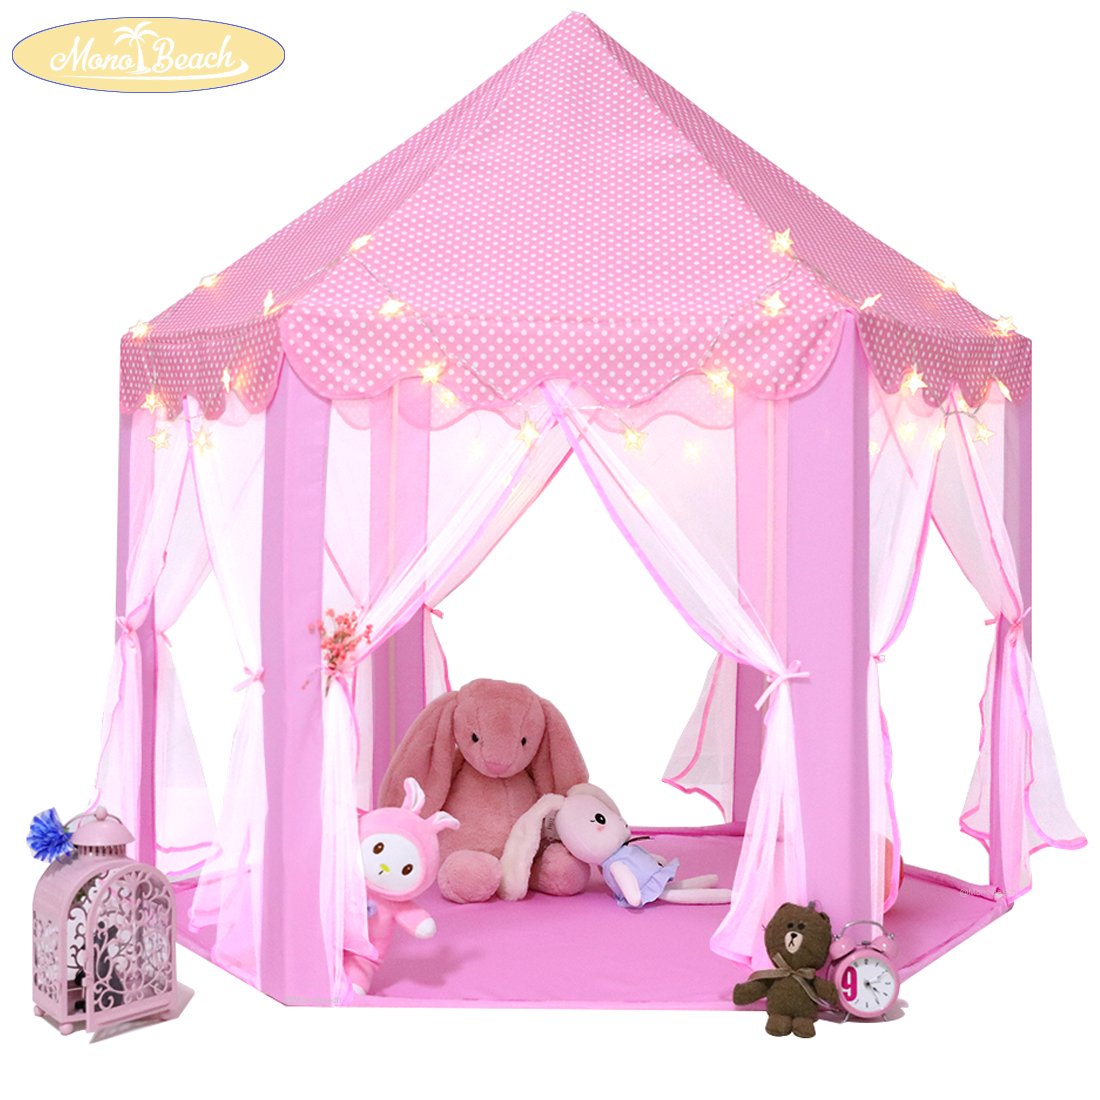 Monobeach Princess Tent Girls Large Playhouse Kids Castle Play Tent with Star Lights Toy for Children Indoor and Outdoor Games, 55'' x 53'' (DxH)